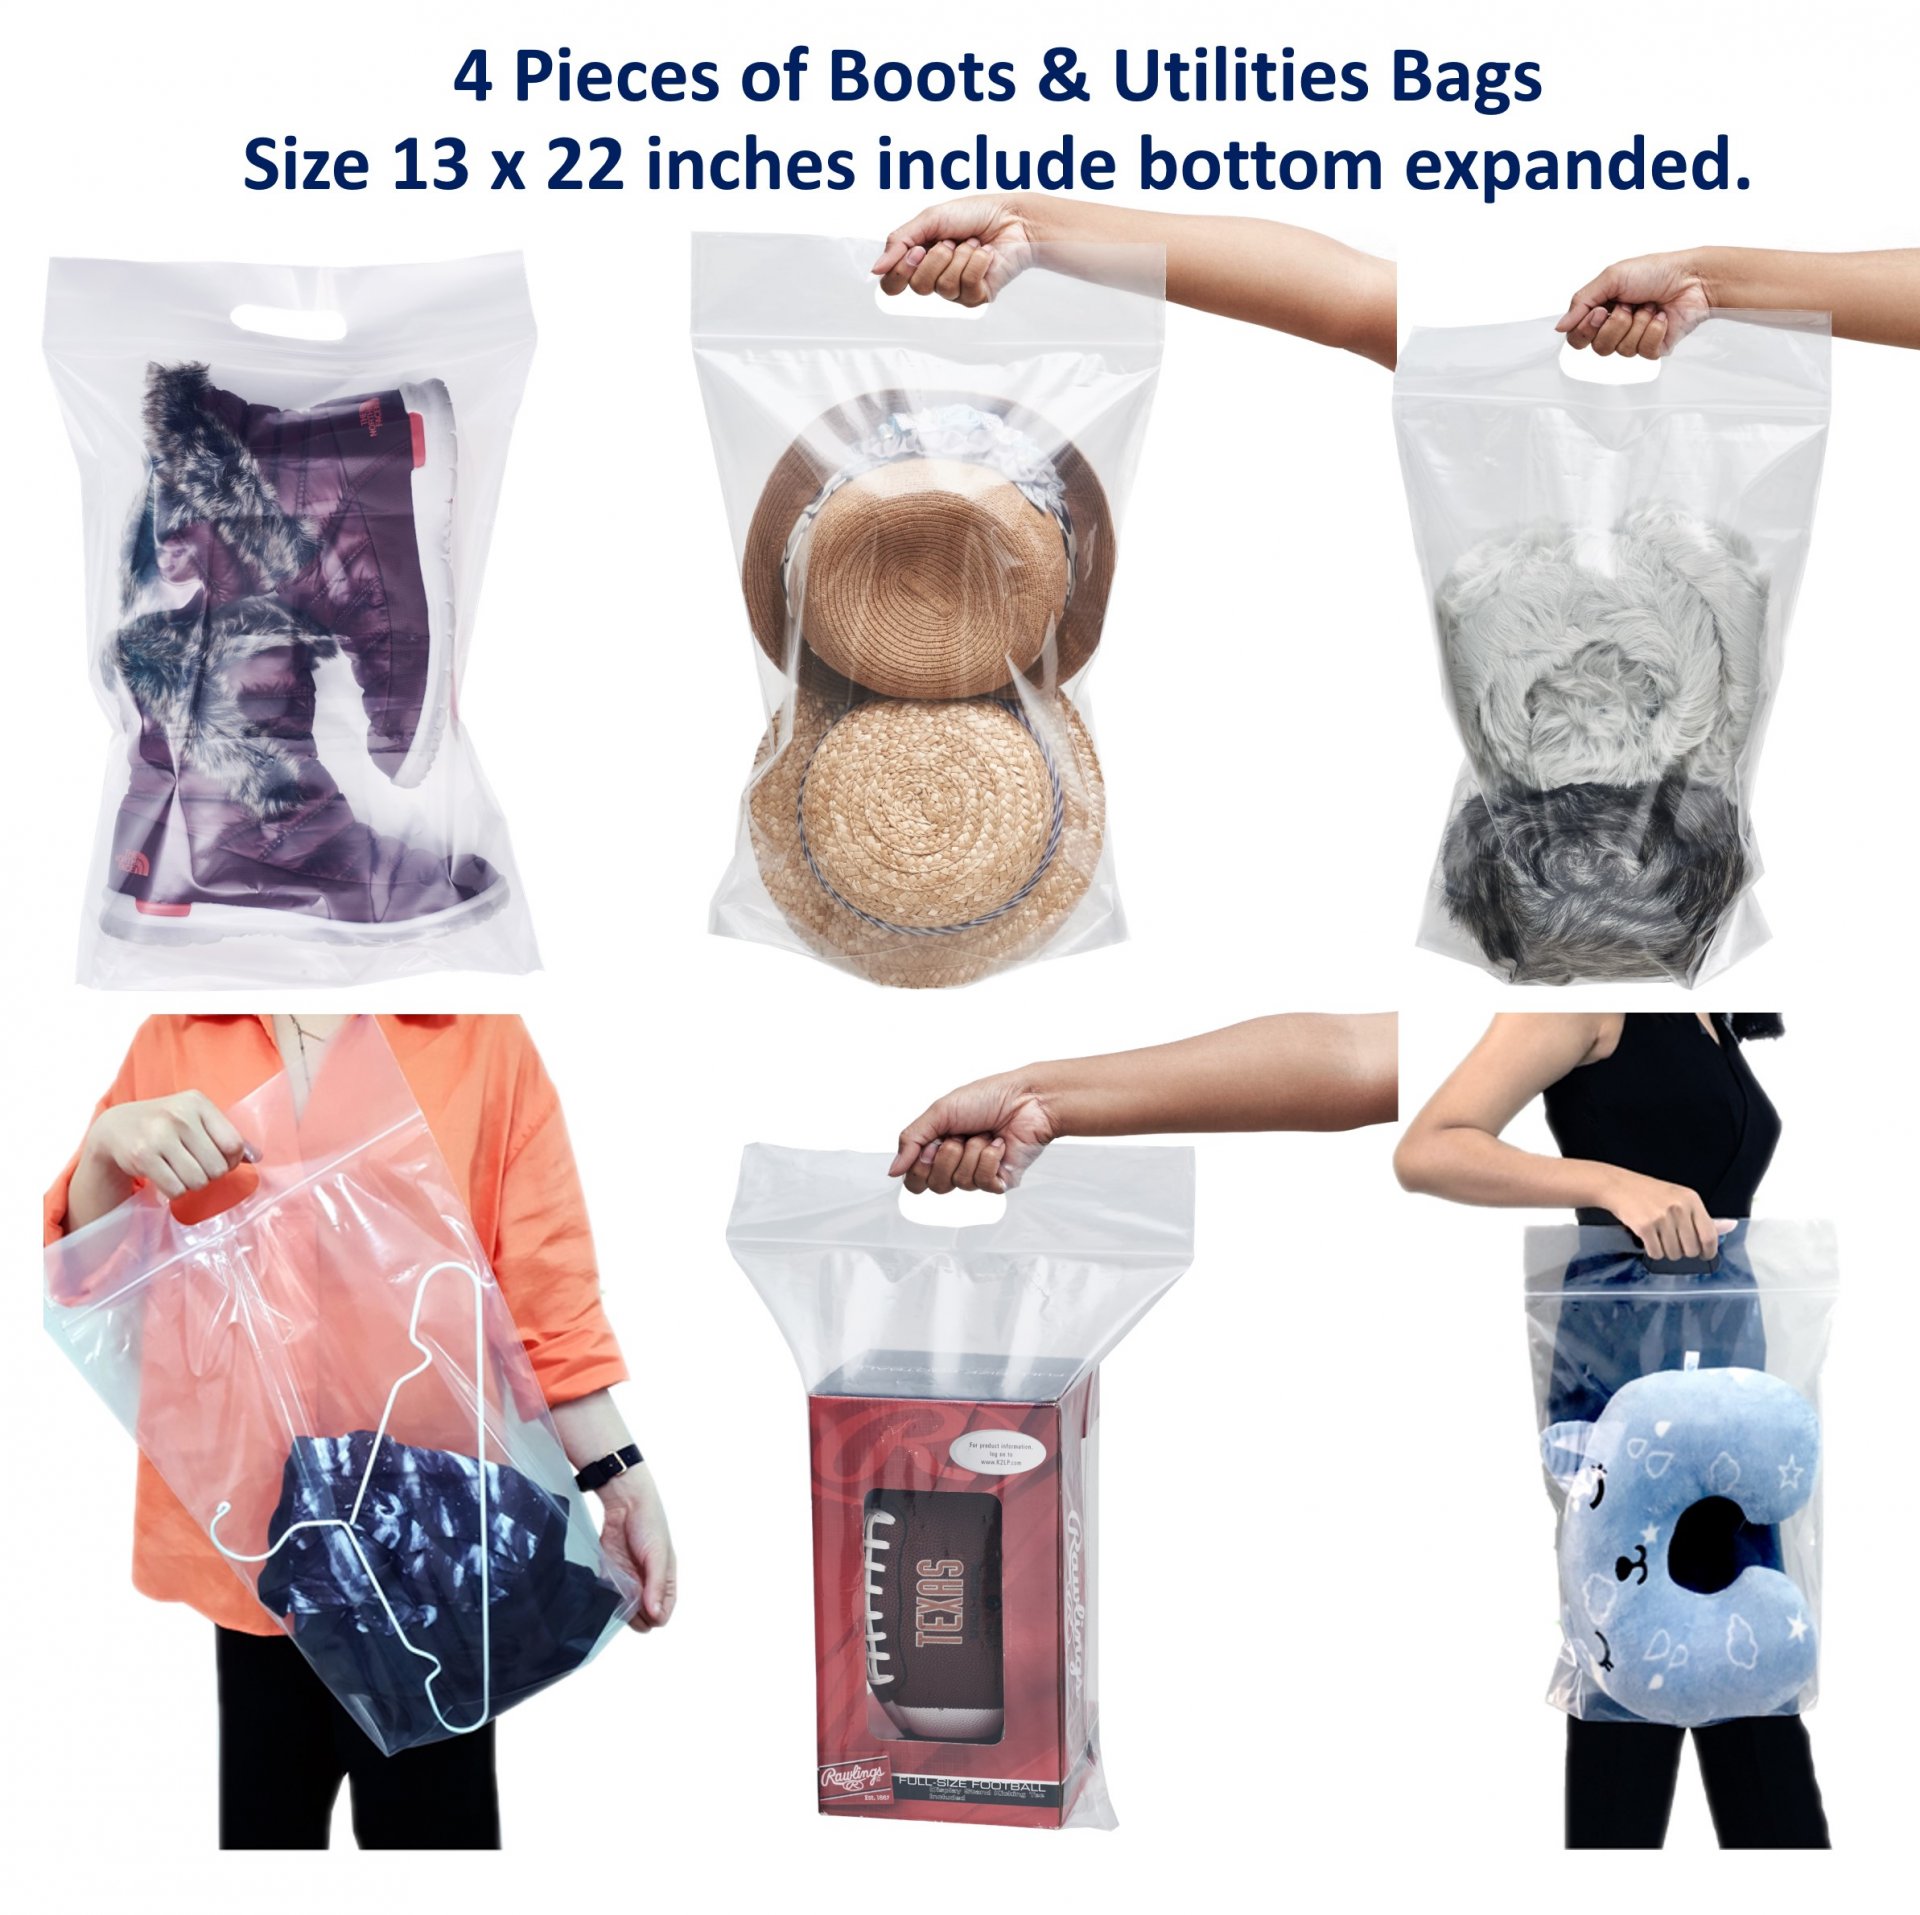 12 pieces of Zipper Heavy duty Clear Plastic Poly Bags Resealable Storage Shoes, Boot, Clothing, Linens, Books, Toys and others, a pleated expandable bottom. (Boot & Utilities Bags)